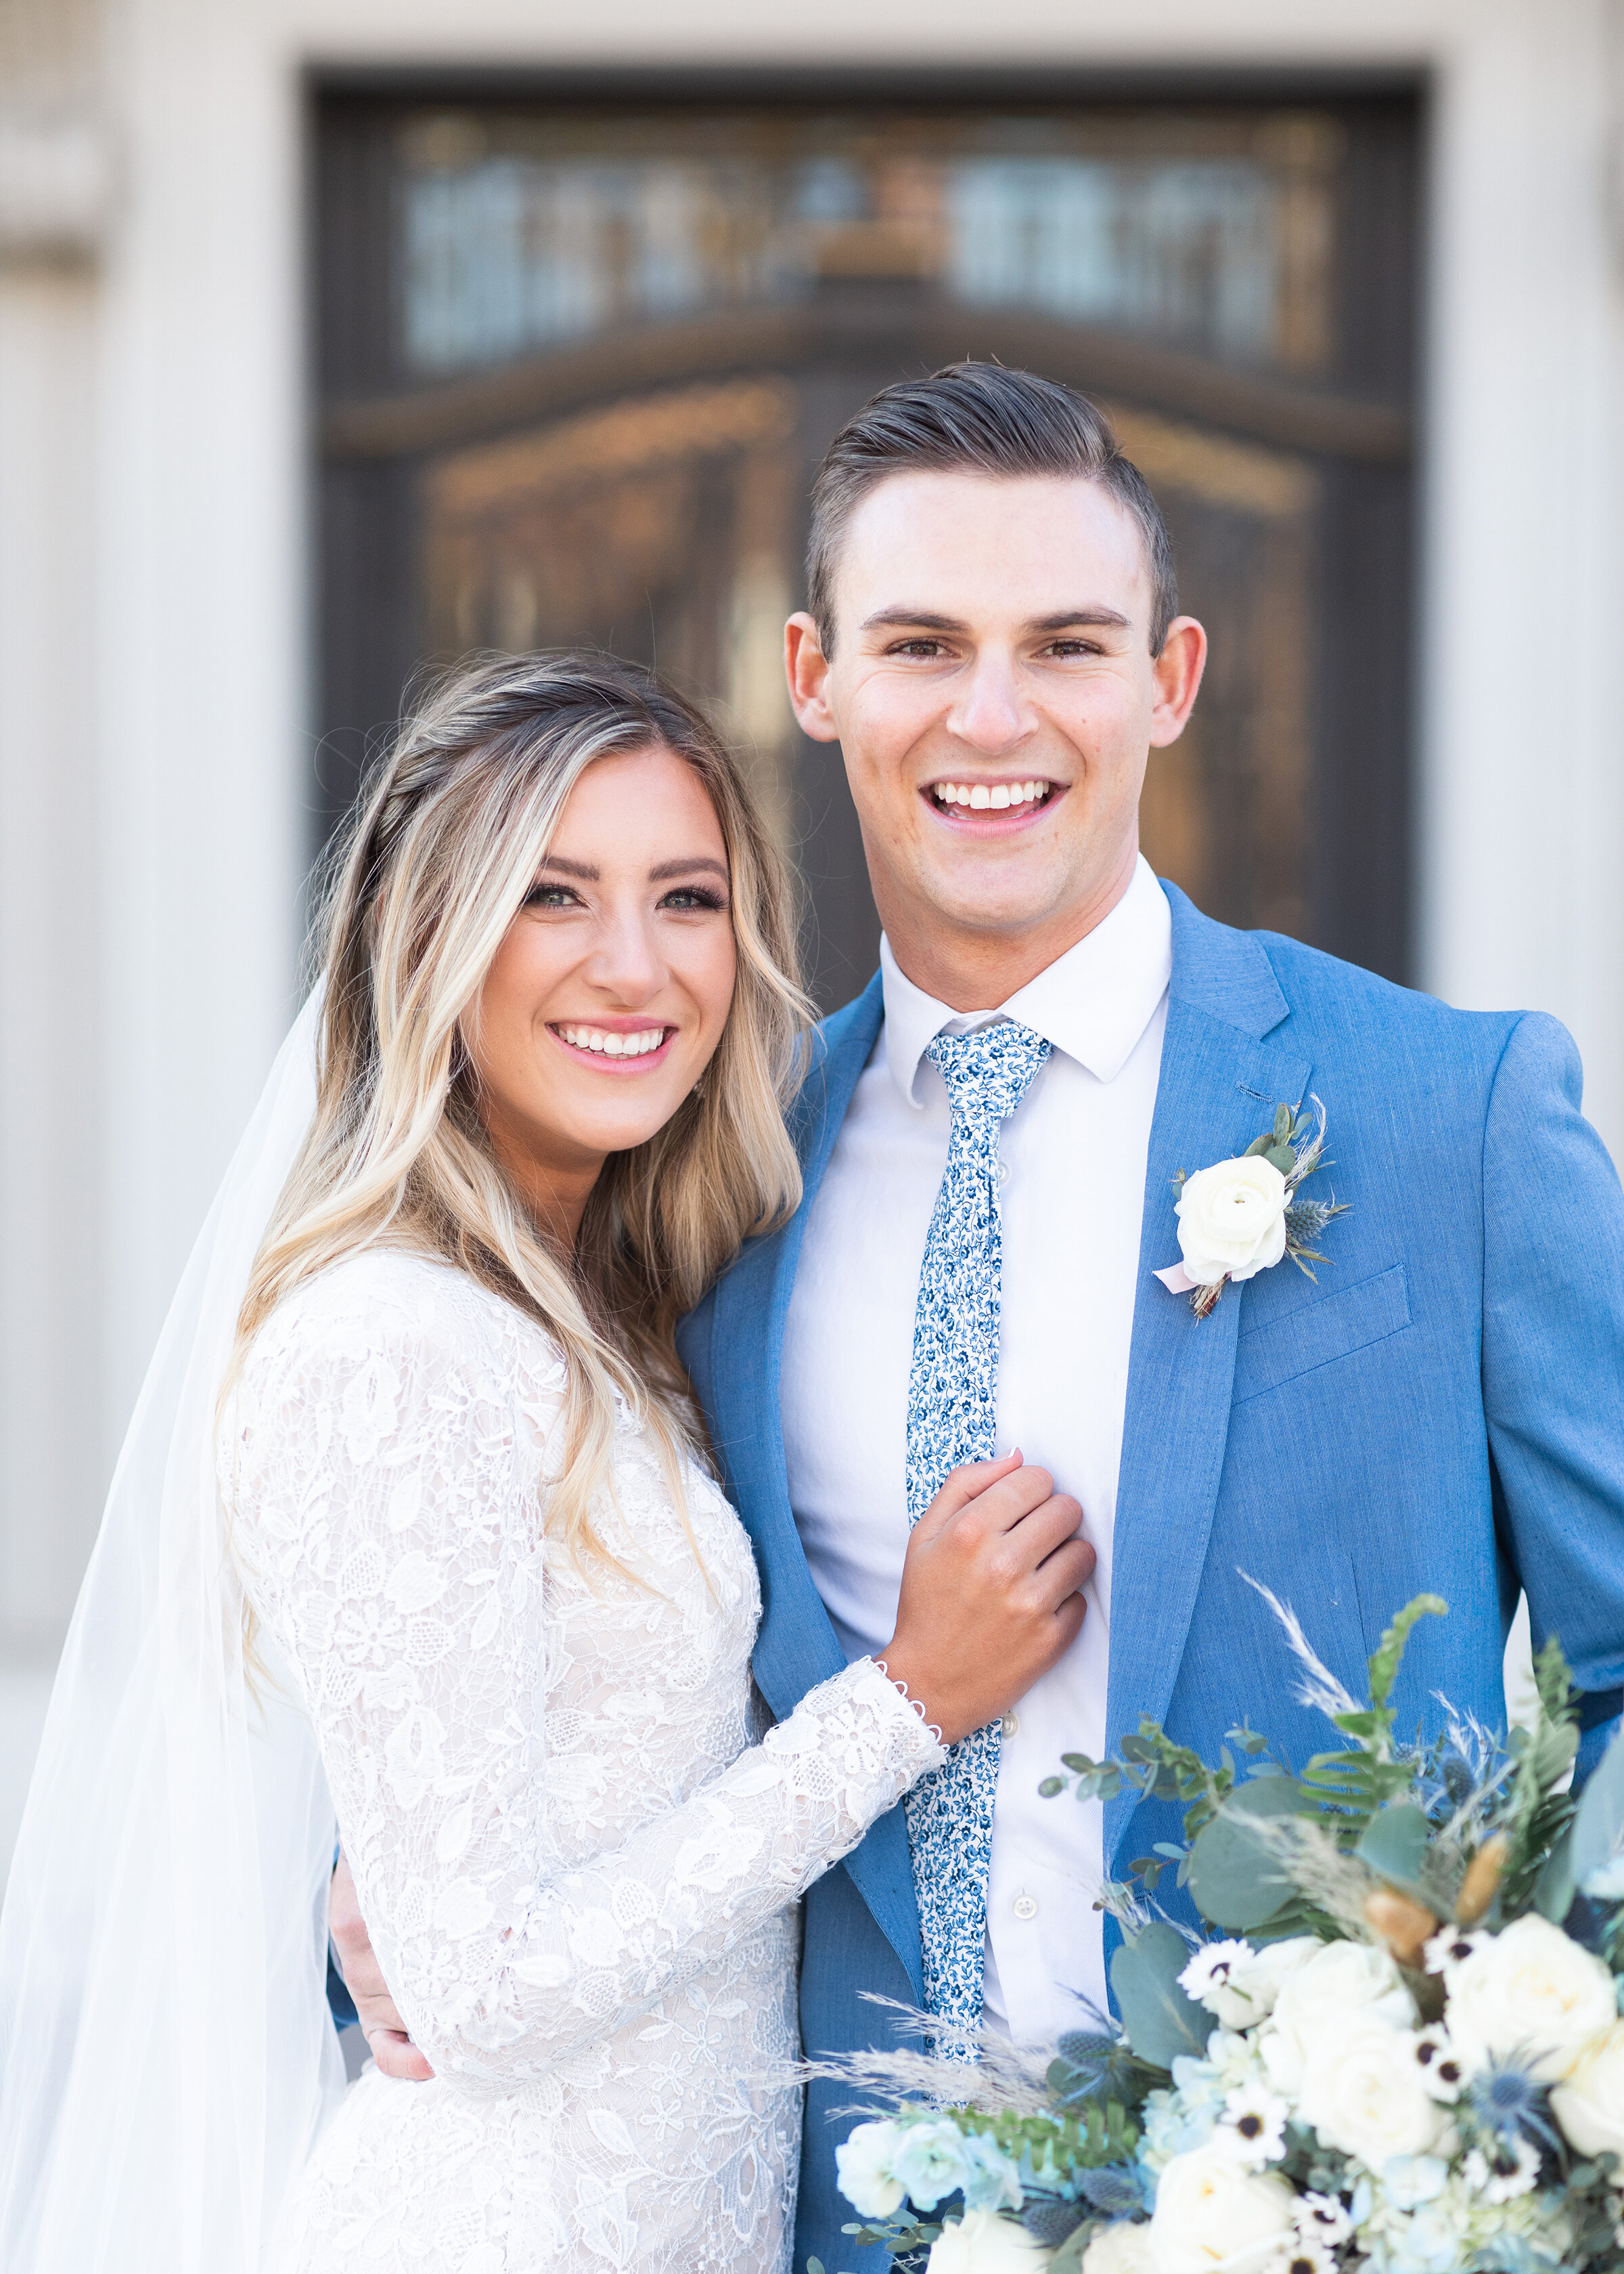  Clarity Lane Photography shoots these happy newlyweds at their reception venue in Salt Lake City, Utah. blonde balyage bridal hair, loose curled bridal hair, half braid bridal hair, long romantic bridal veil, blue wedding suit, blue and white weddin